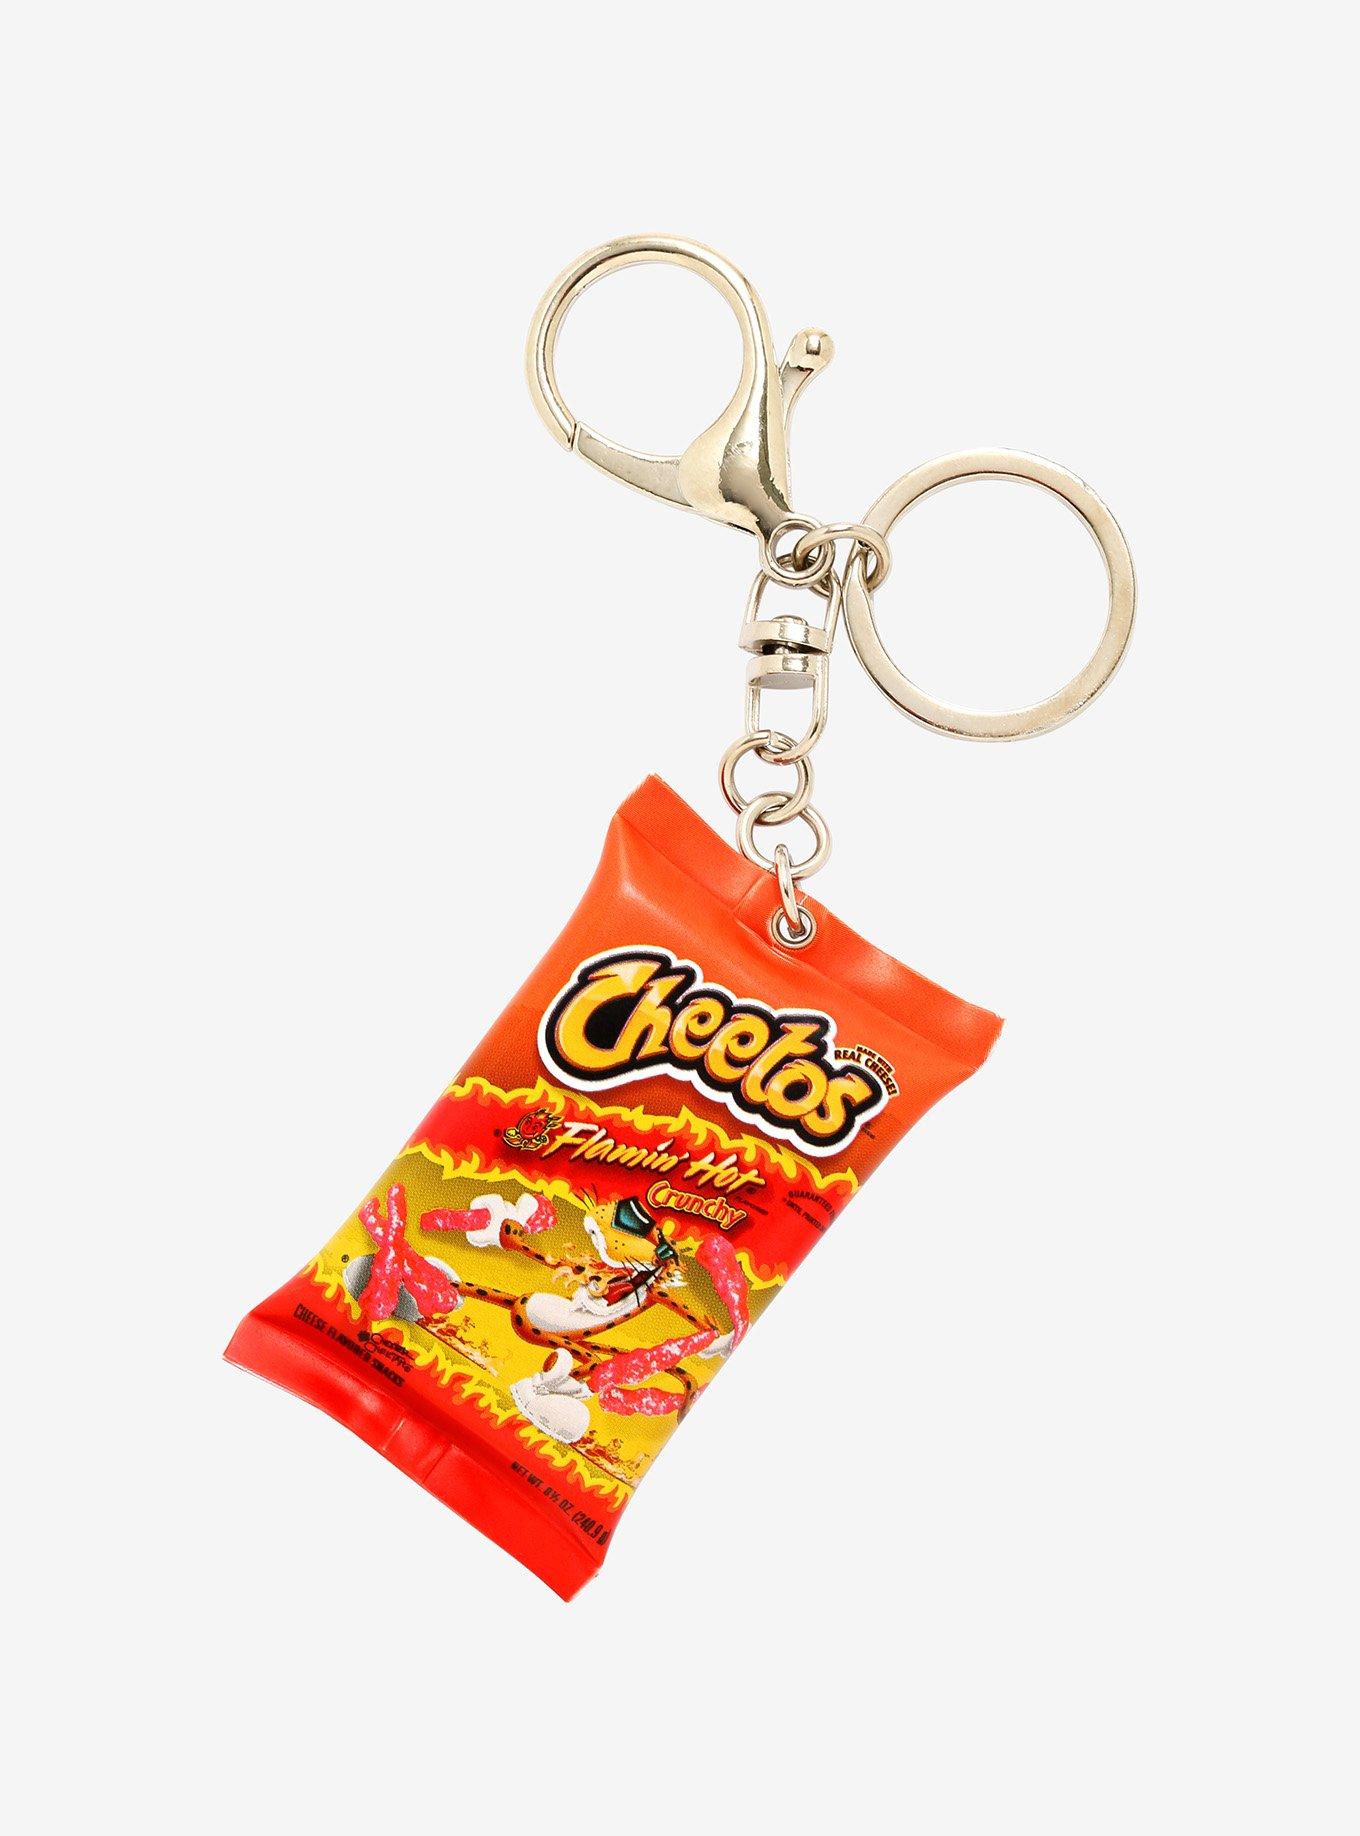 Cheetos FLAMIN mini Backpack ( Price Is Firm) Cash Only for Sale